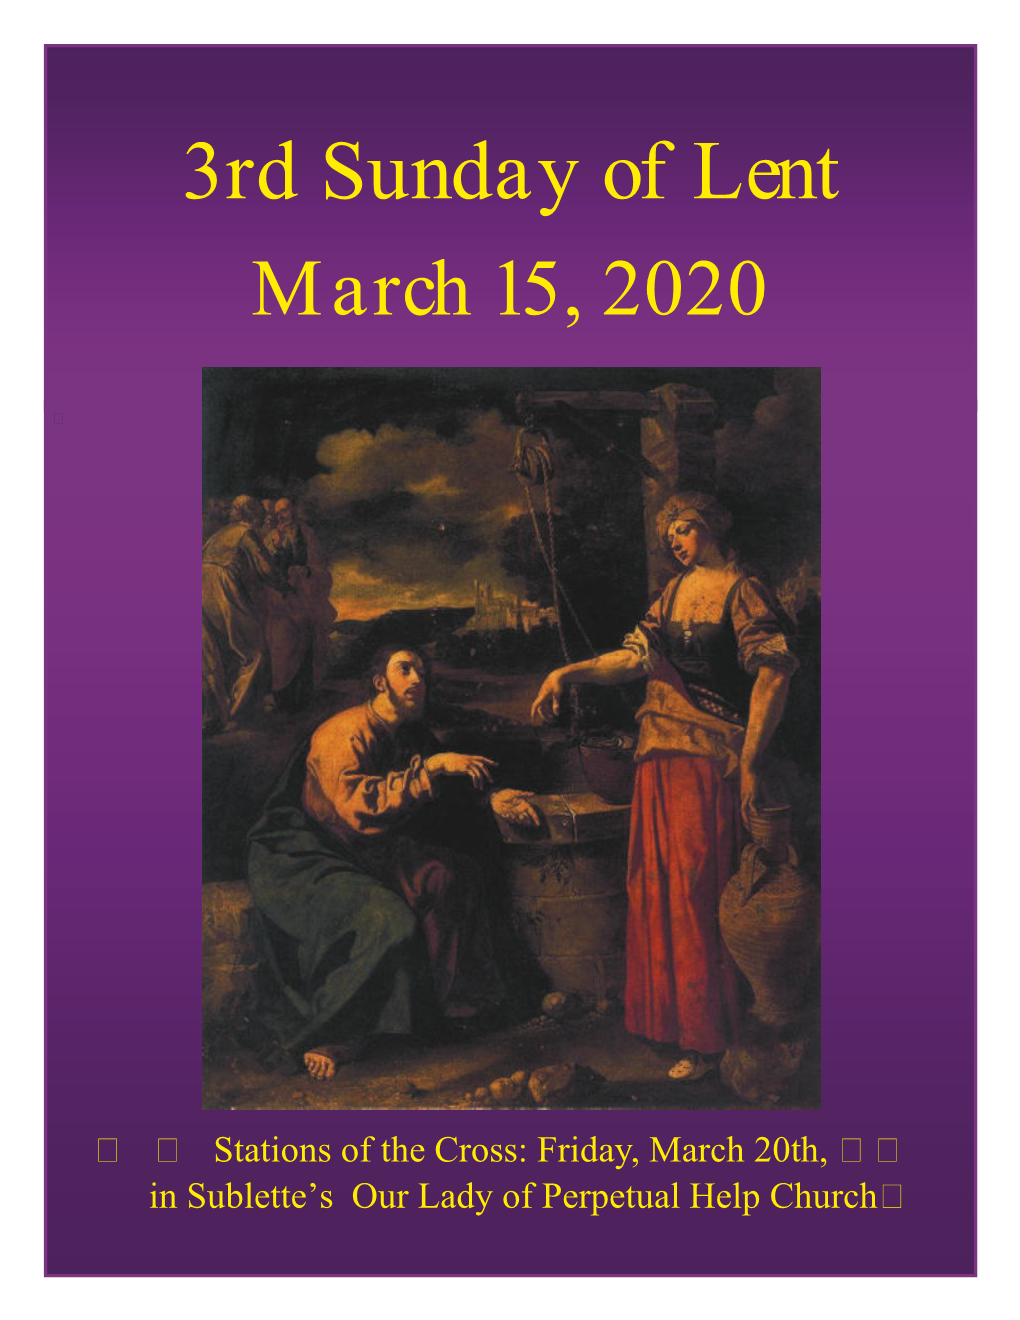 3Rd Sunday of Lent March 15, 2020